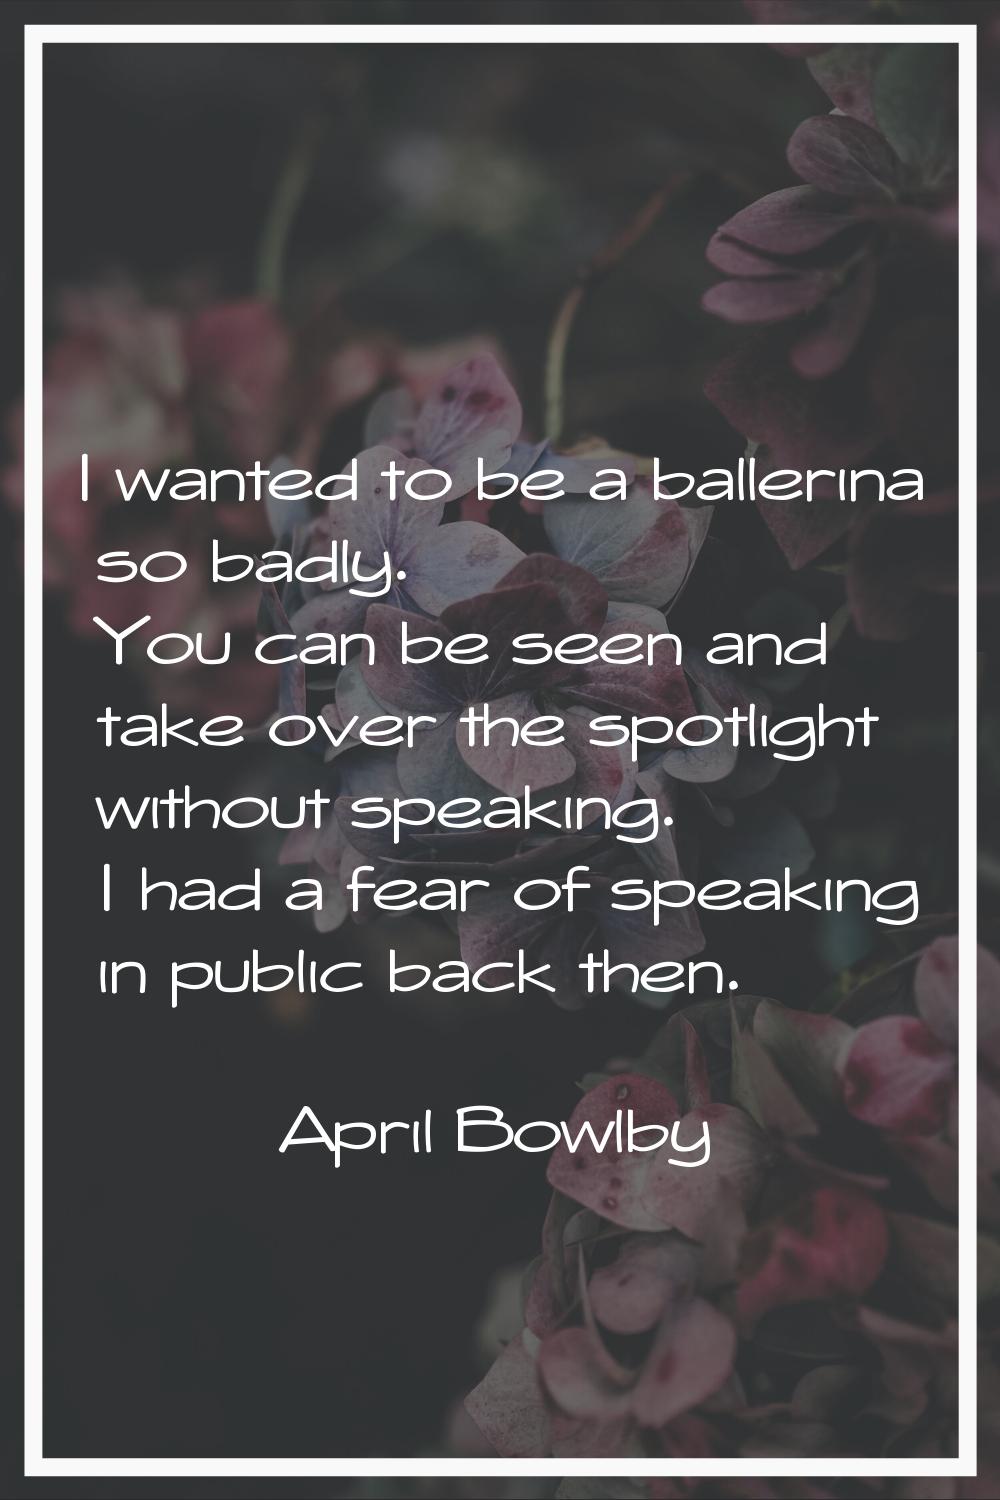 I wanted to be a ballerina so badly. You can be seen and take over the spotlight without speaking. 